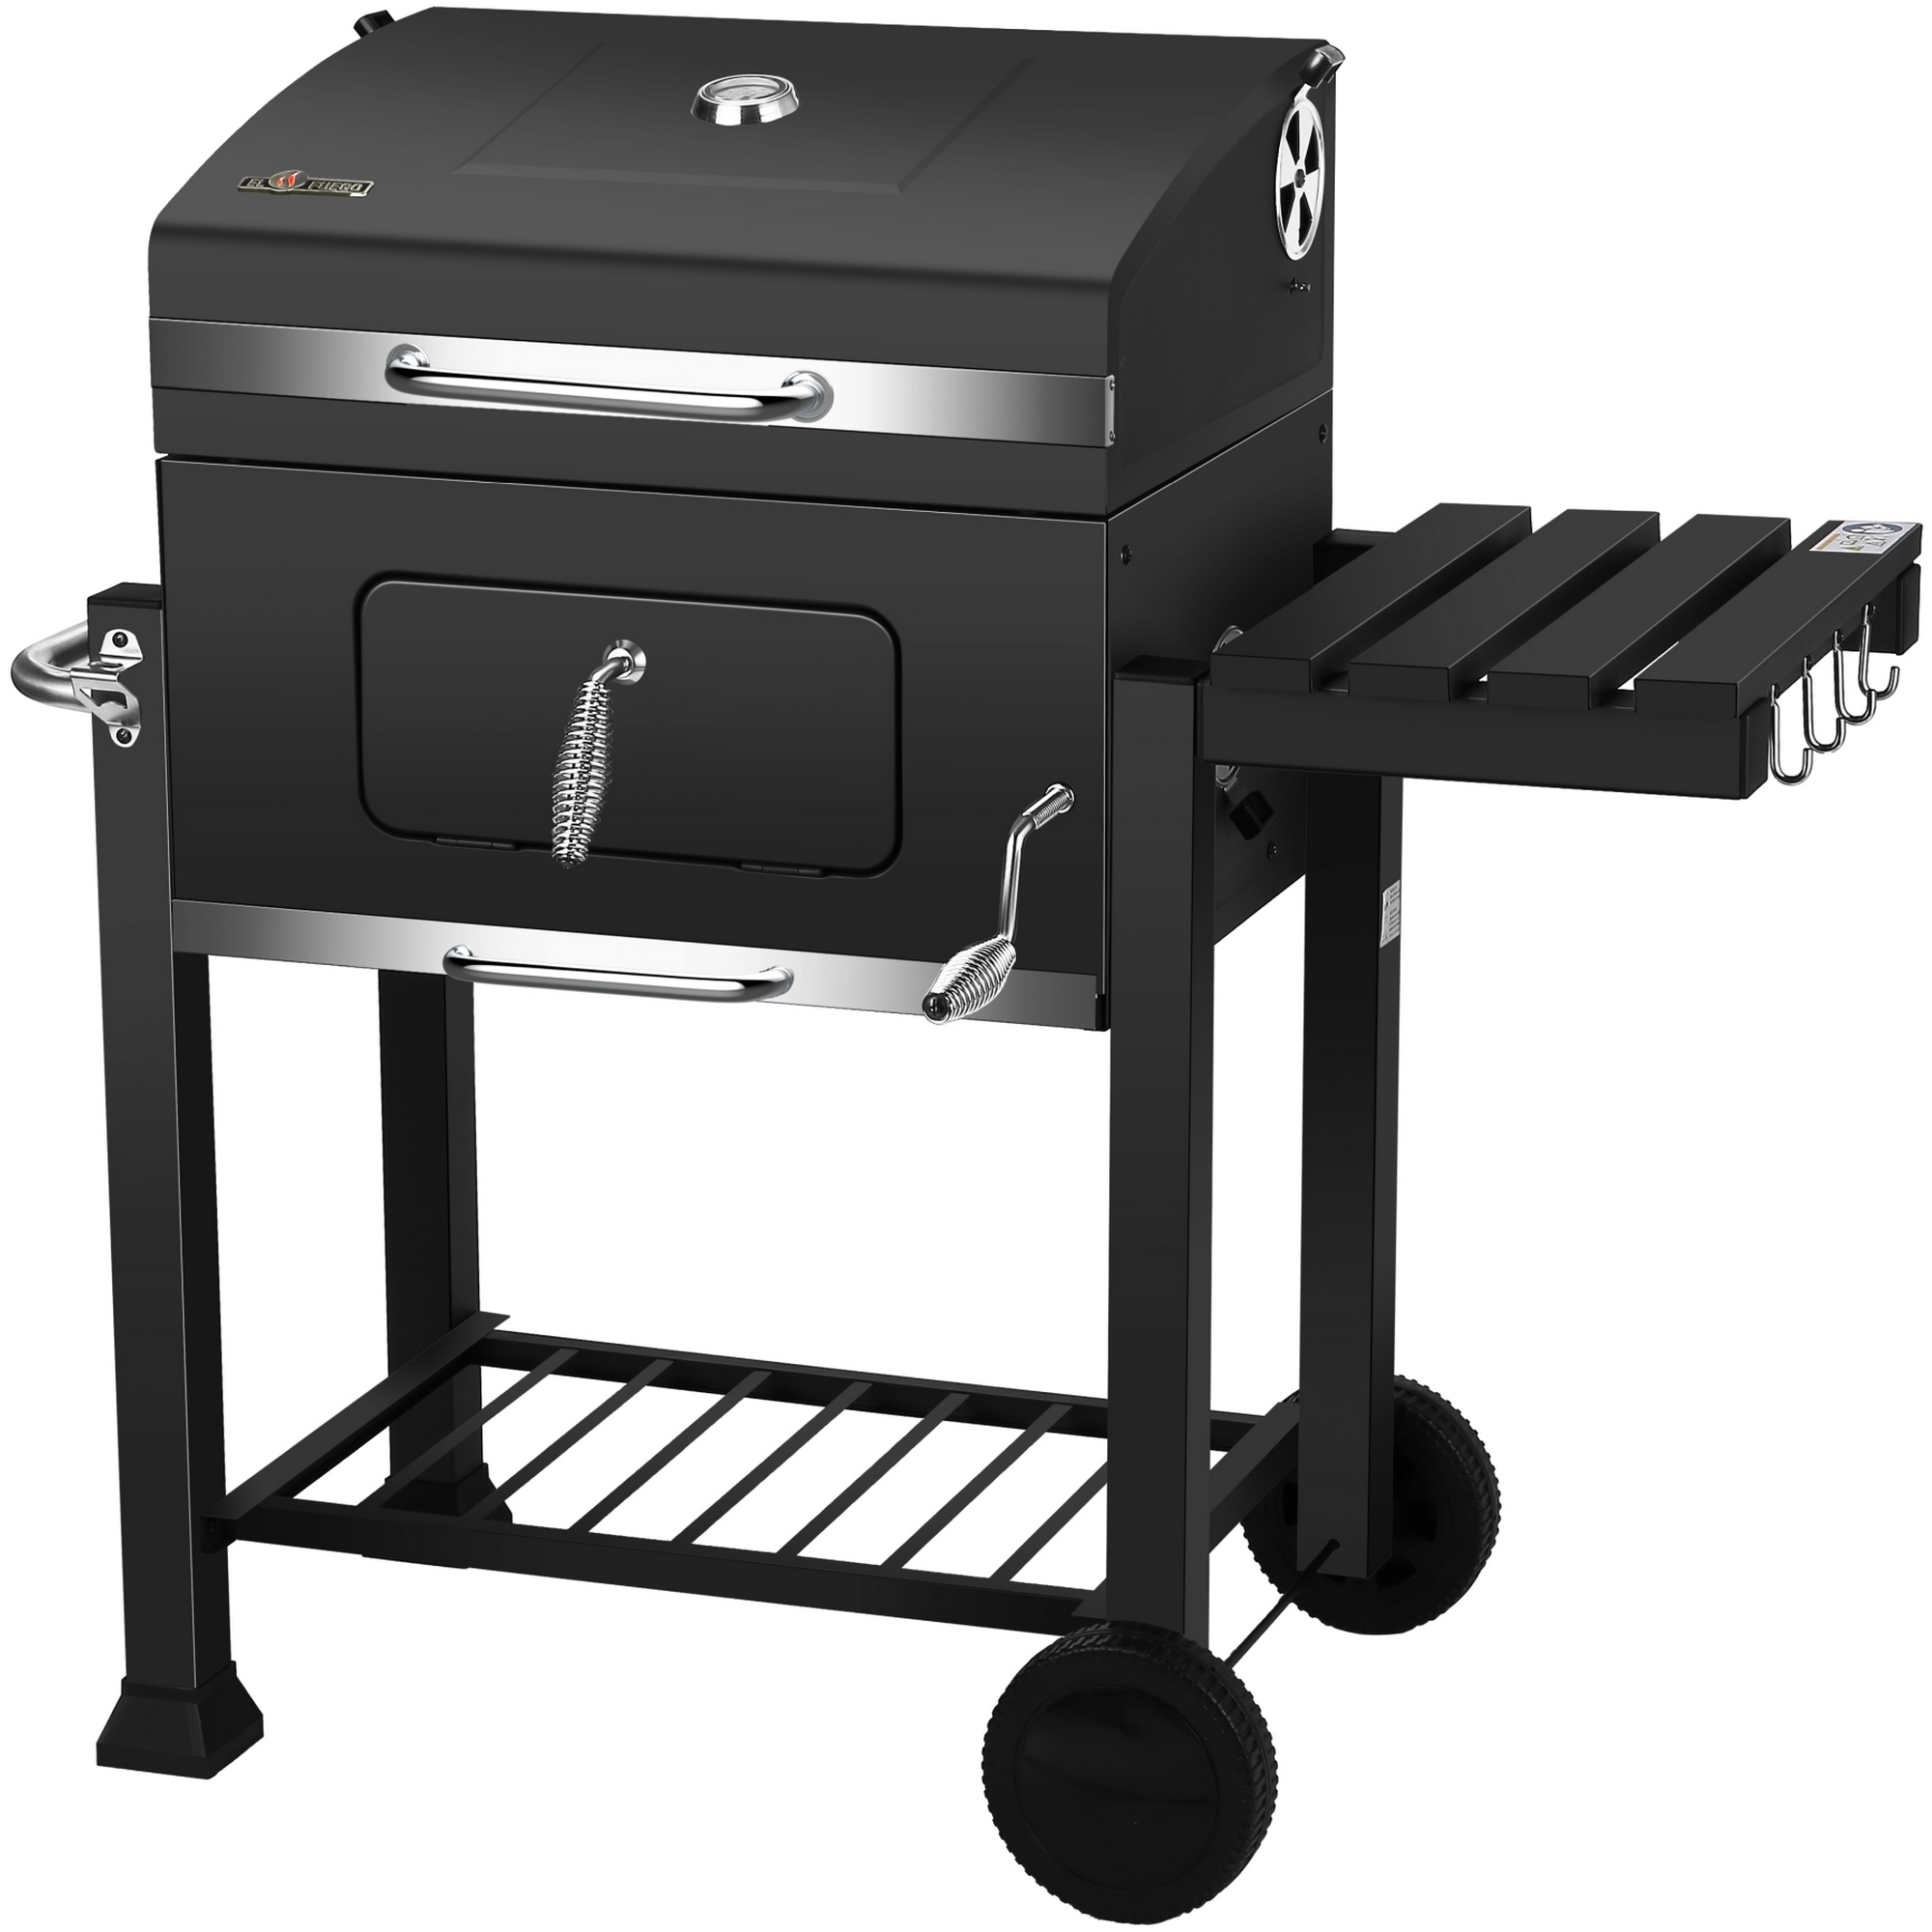 Holzkohlegrill 'Ontario Deluxe' schwarz 114 x 108 x 65 cm + product picture